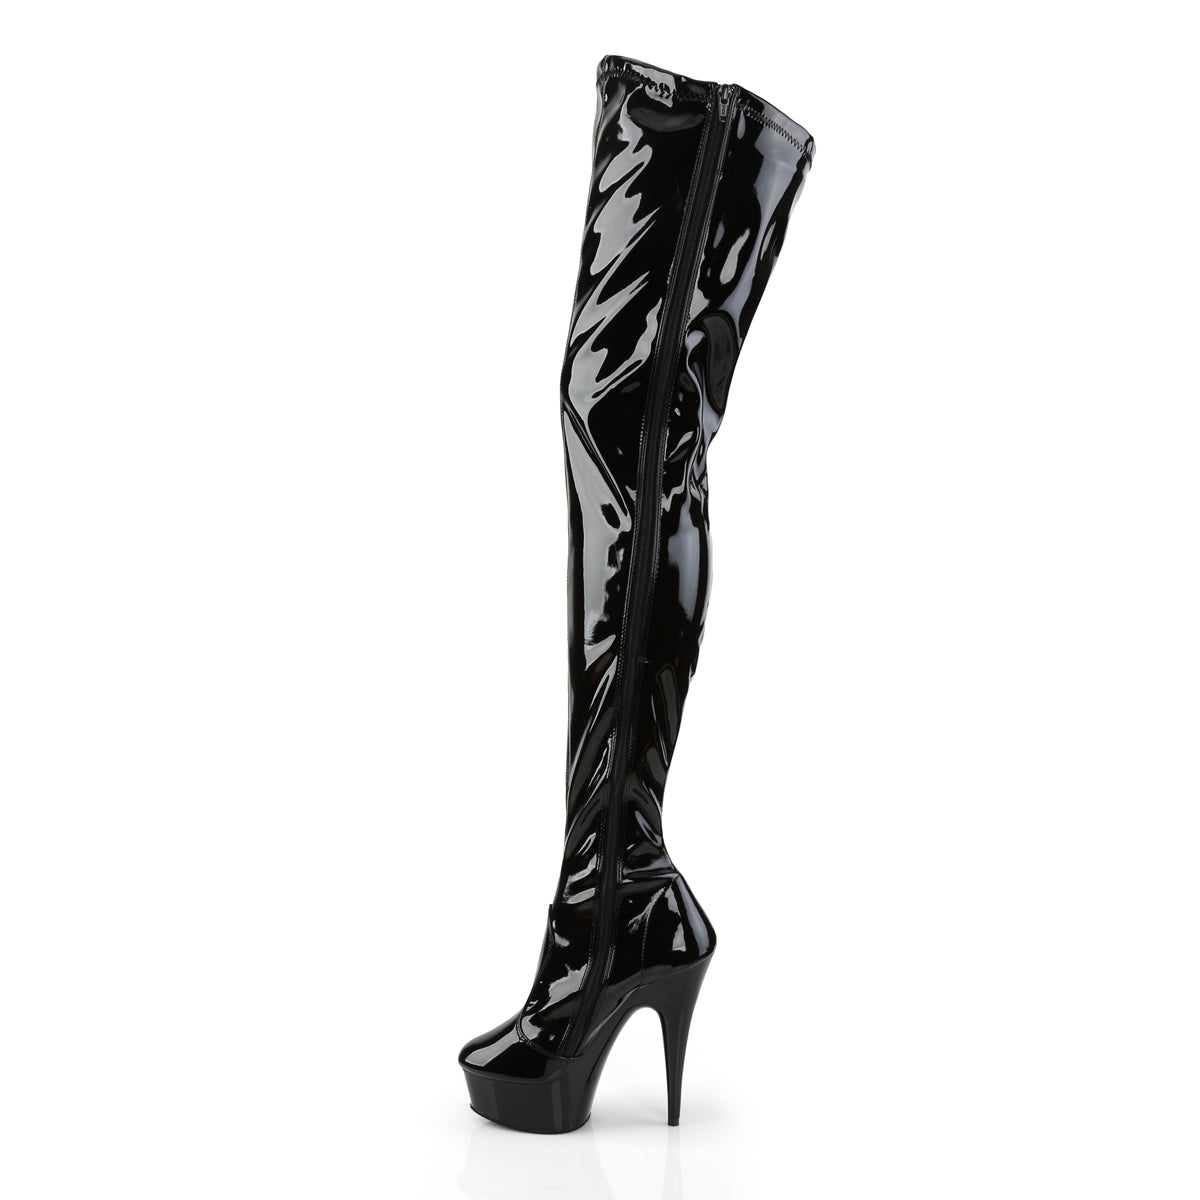 DELIGHT-4000 6" Heel Black Stretch Patent Pole Dancer Boots-Pleaser- Sexy Shoes Pole Dance Heels